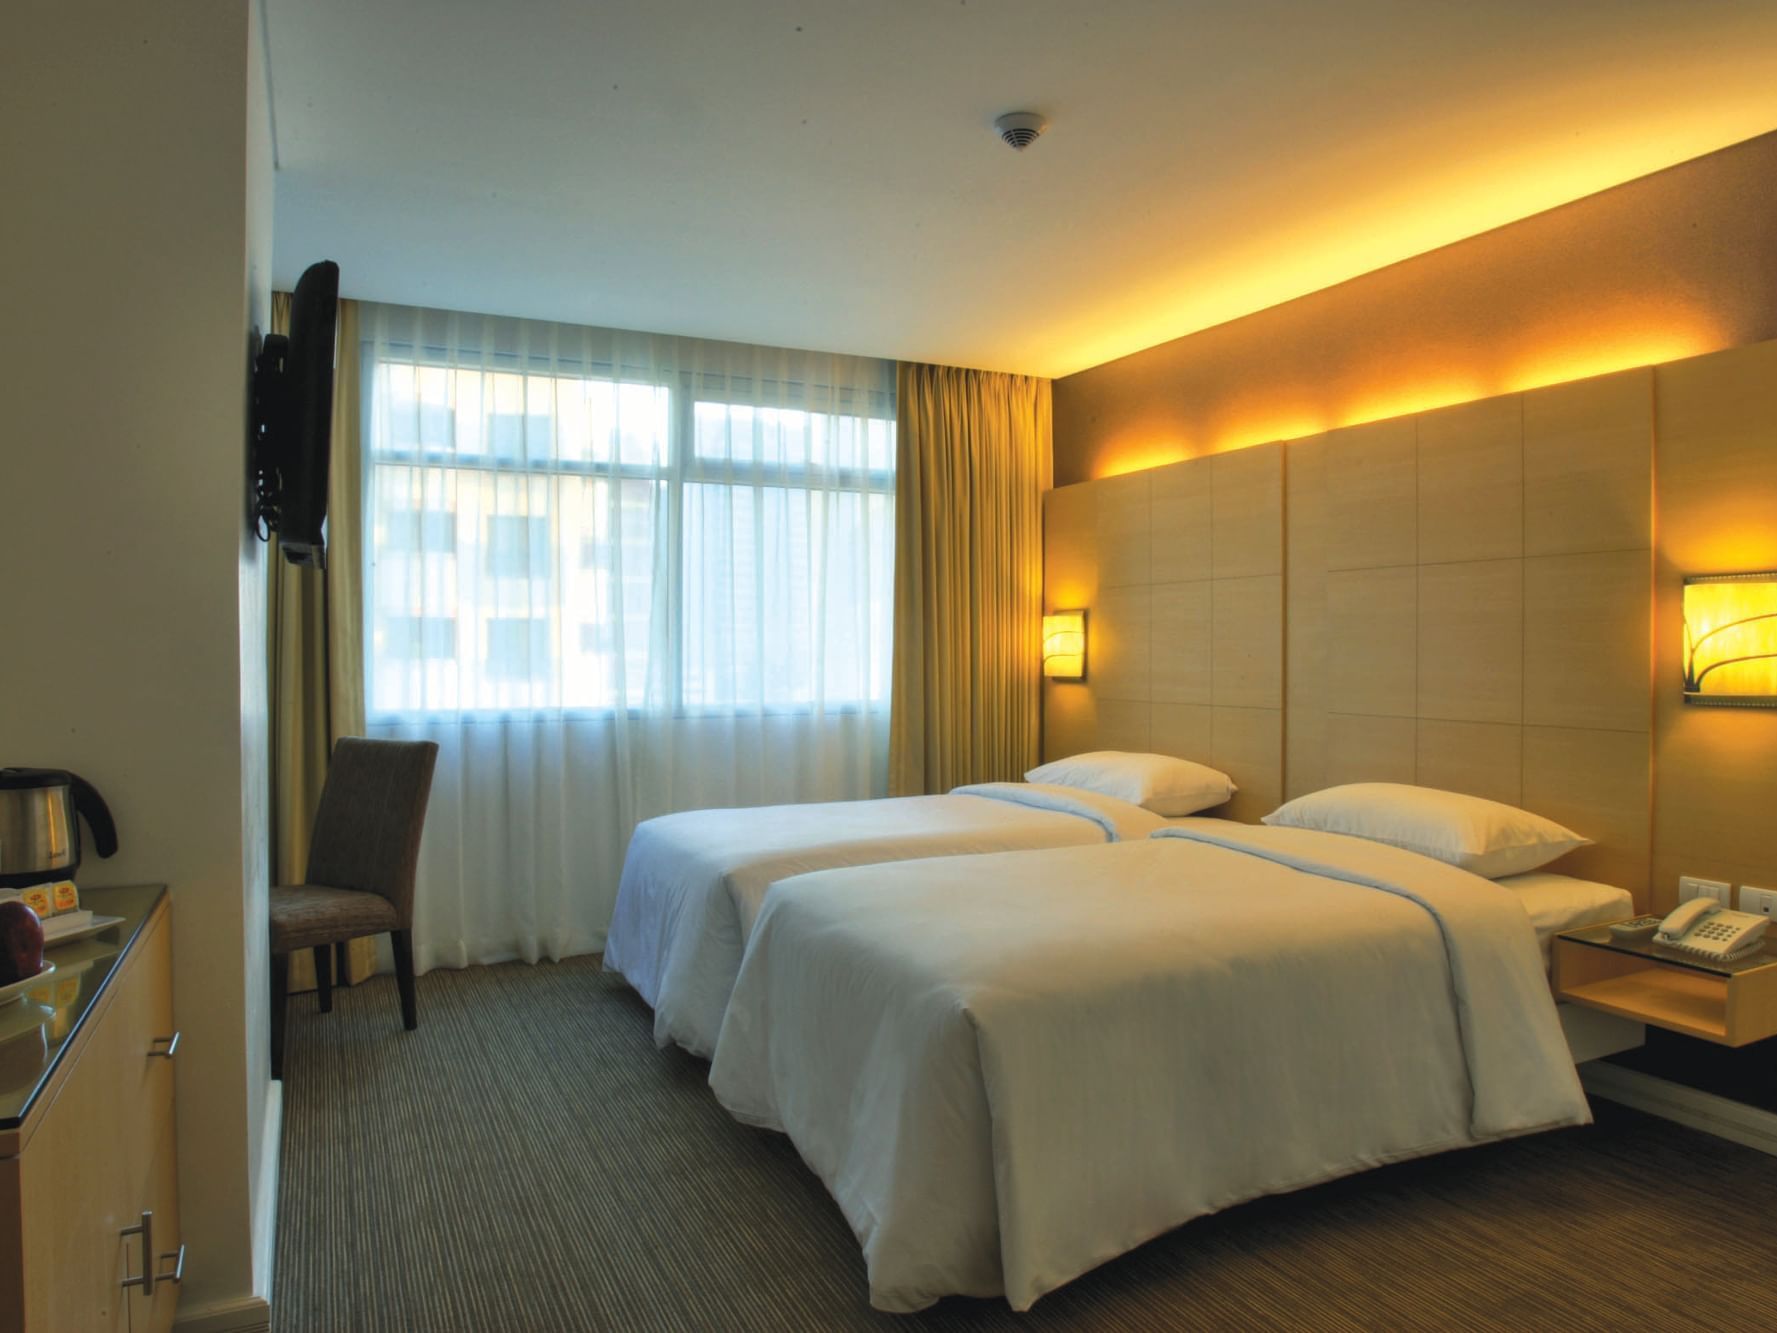 Interior of the Deluxe Room at St Giles Makati Hotel